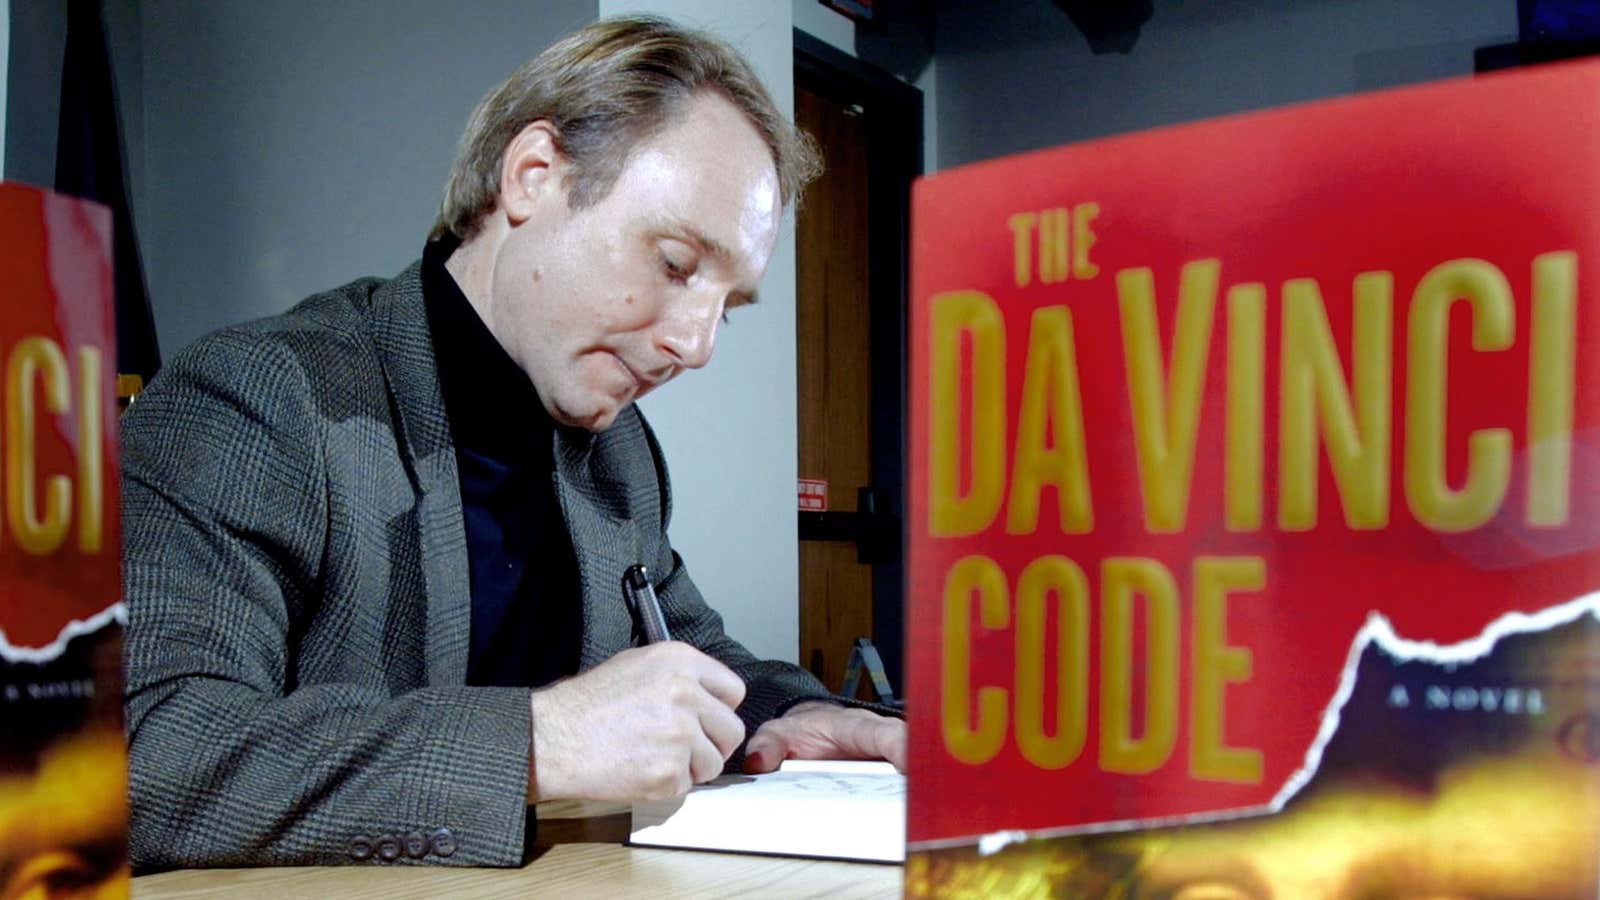 So you want to be a bestselling author? Dan Brown can teach you.